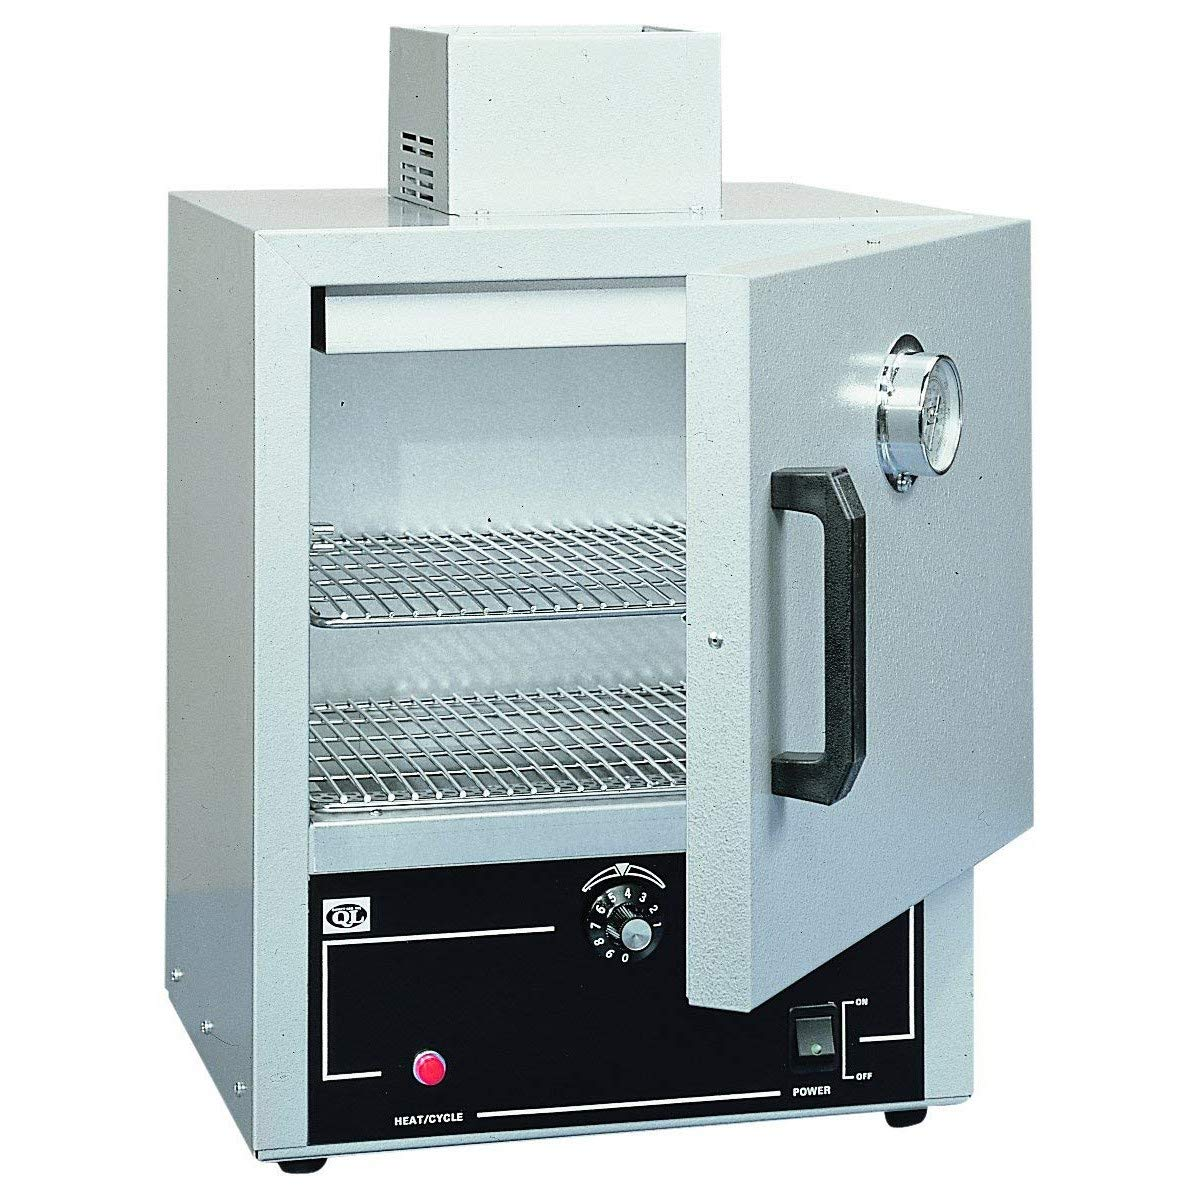 Lab convection ovens with heat treating, convection ovens, gravity convection ovens, precise temperature control and air convection ovens